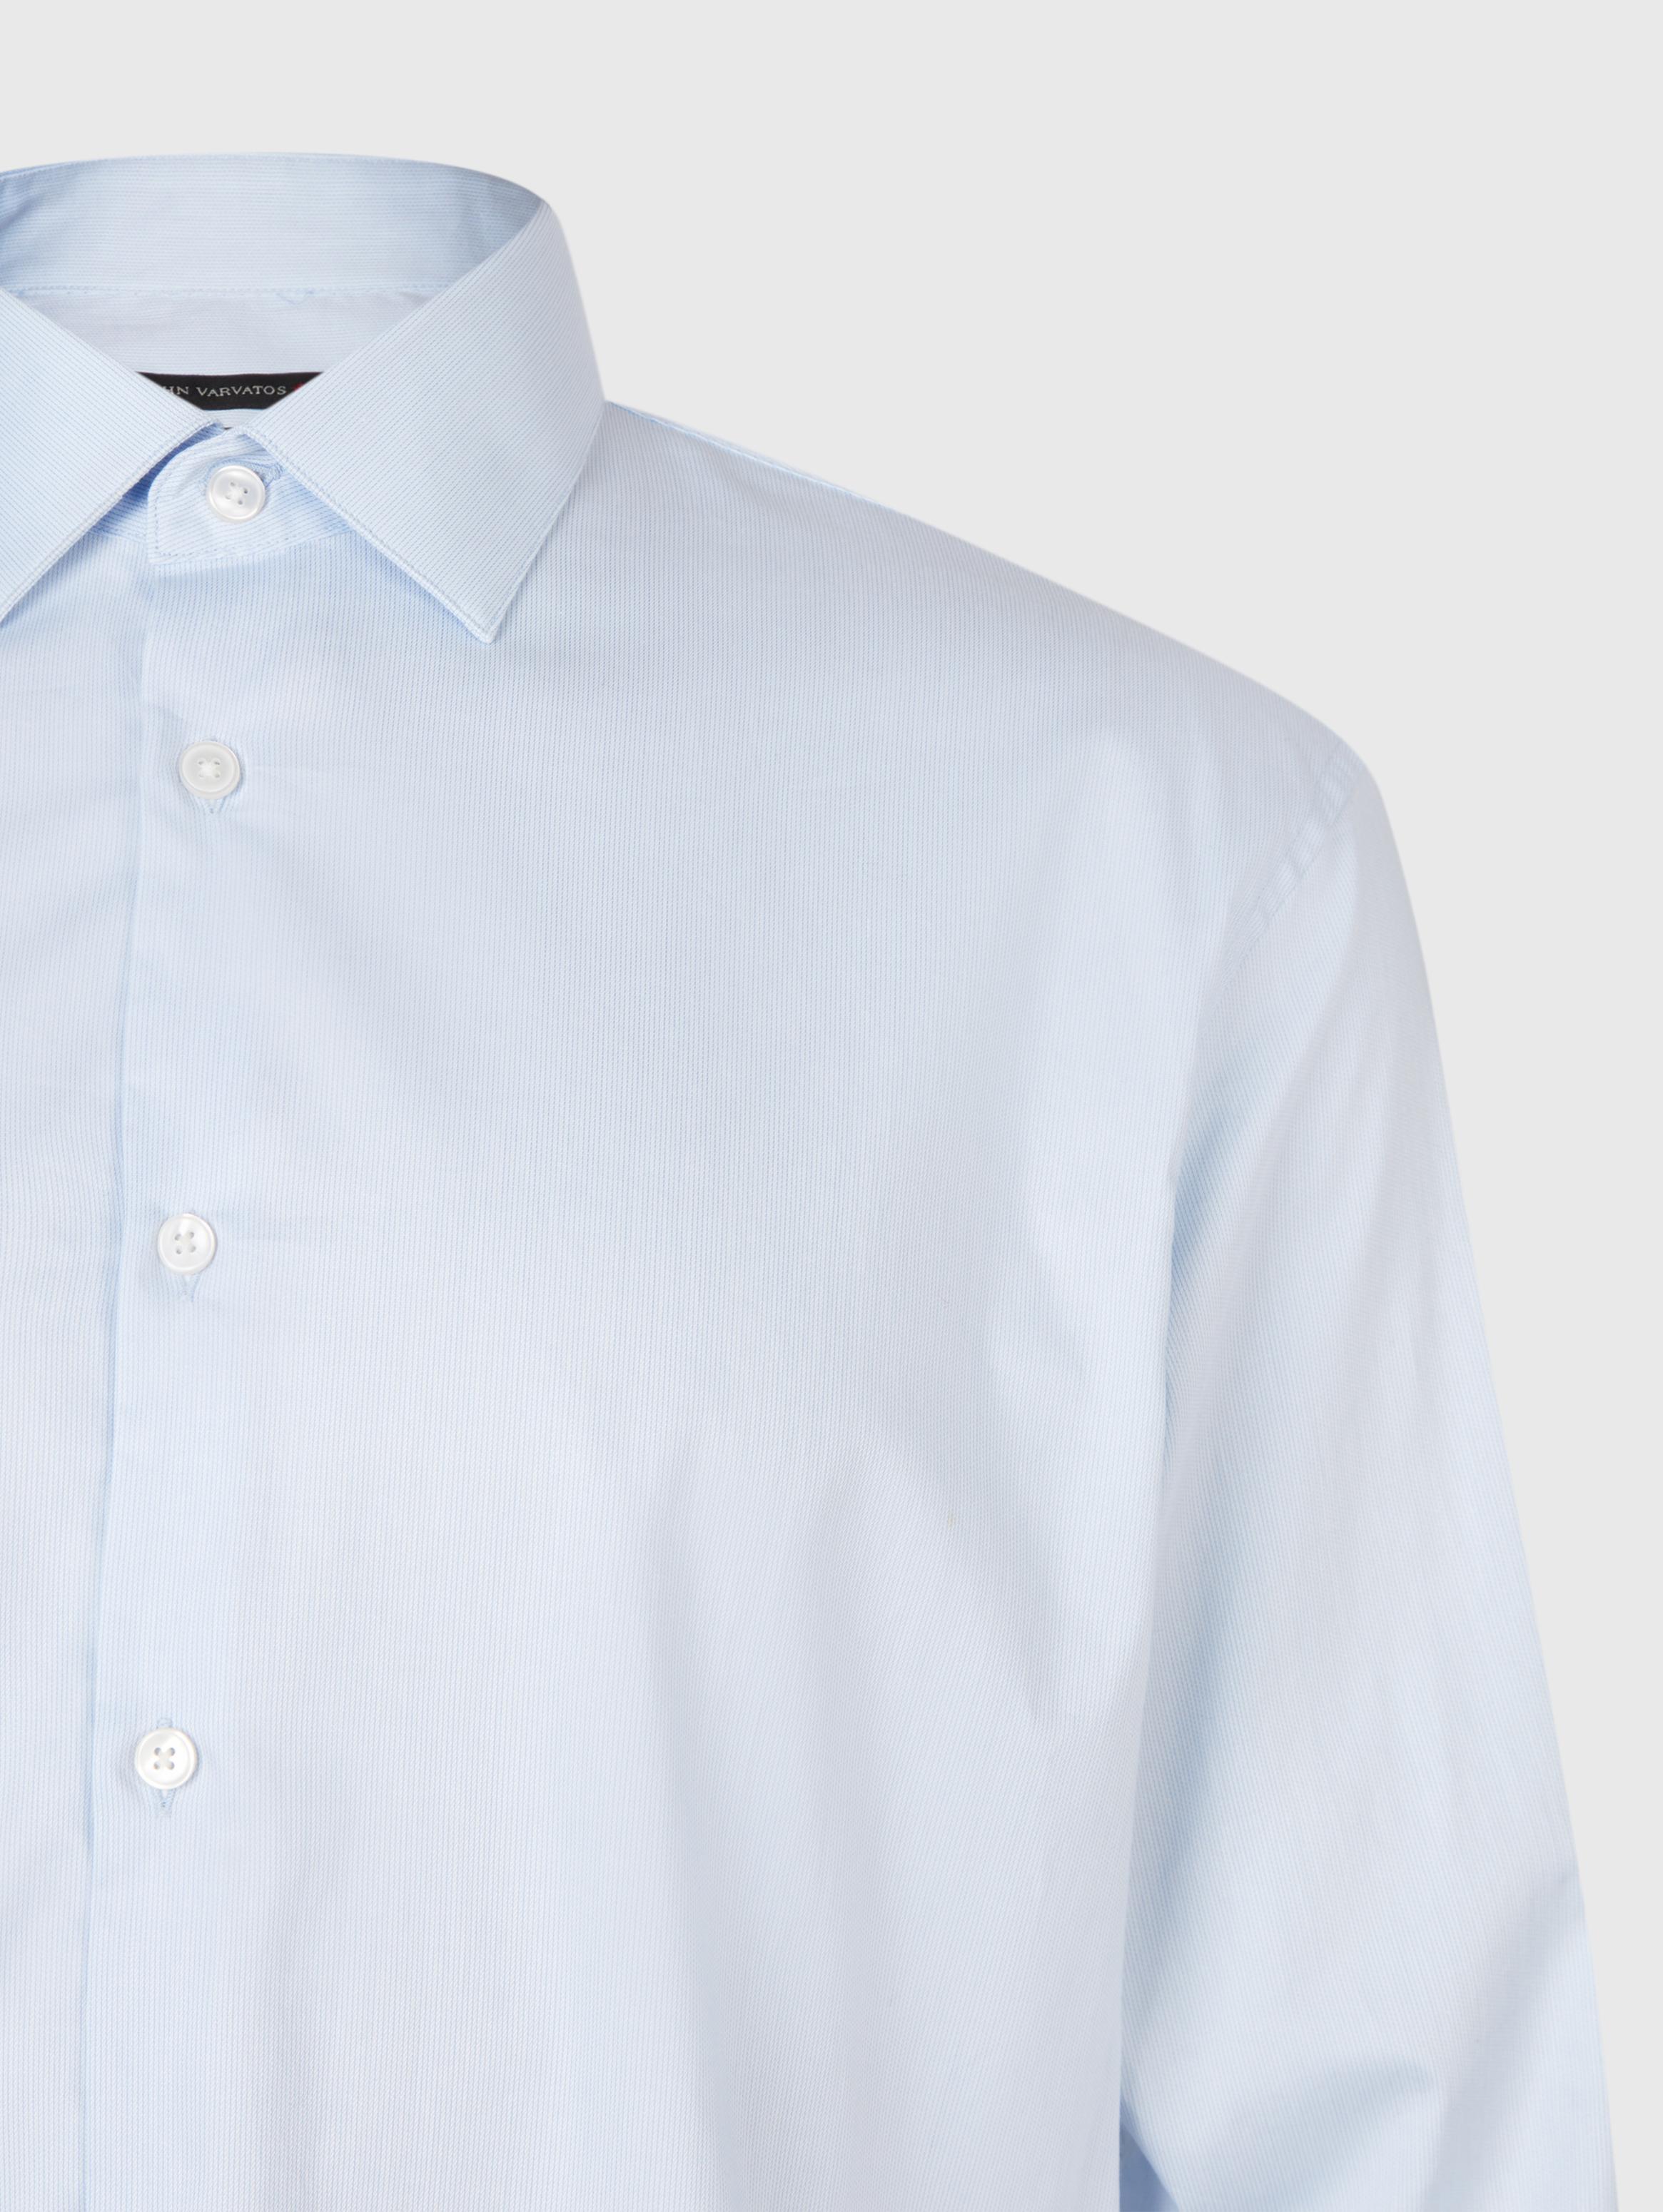 SLIM FIT DRESS SHIRT WITH UNDERPLACKET image number 3